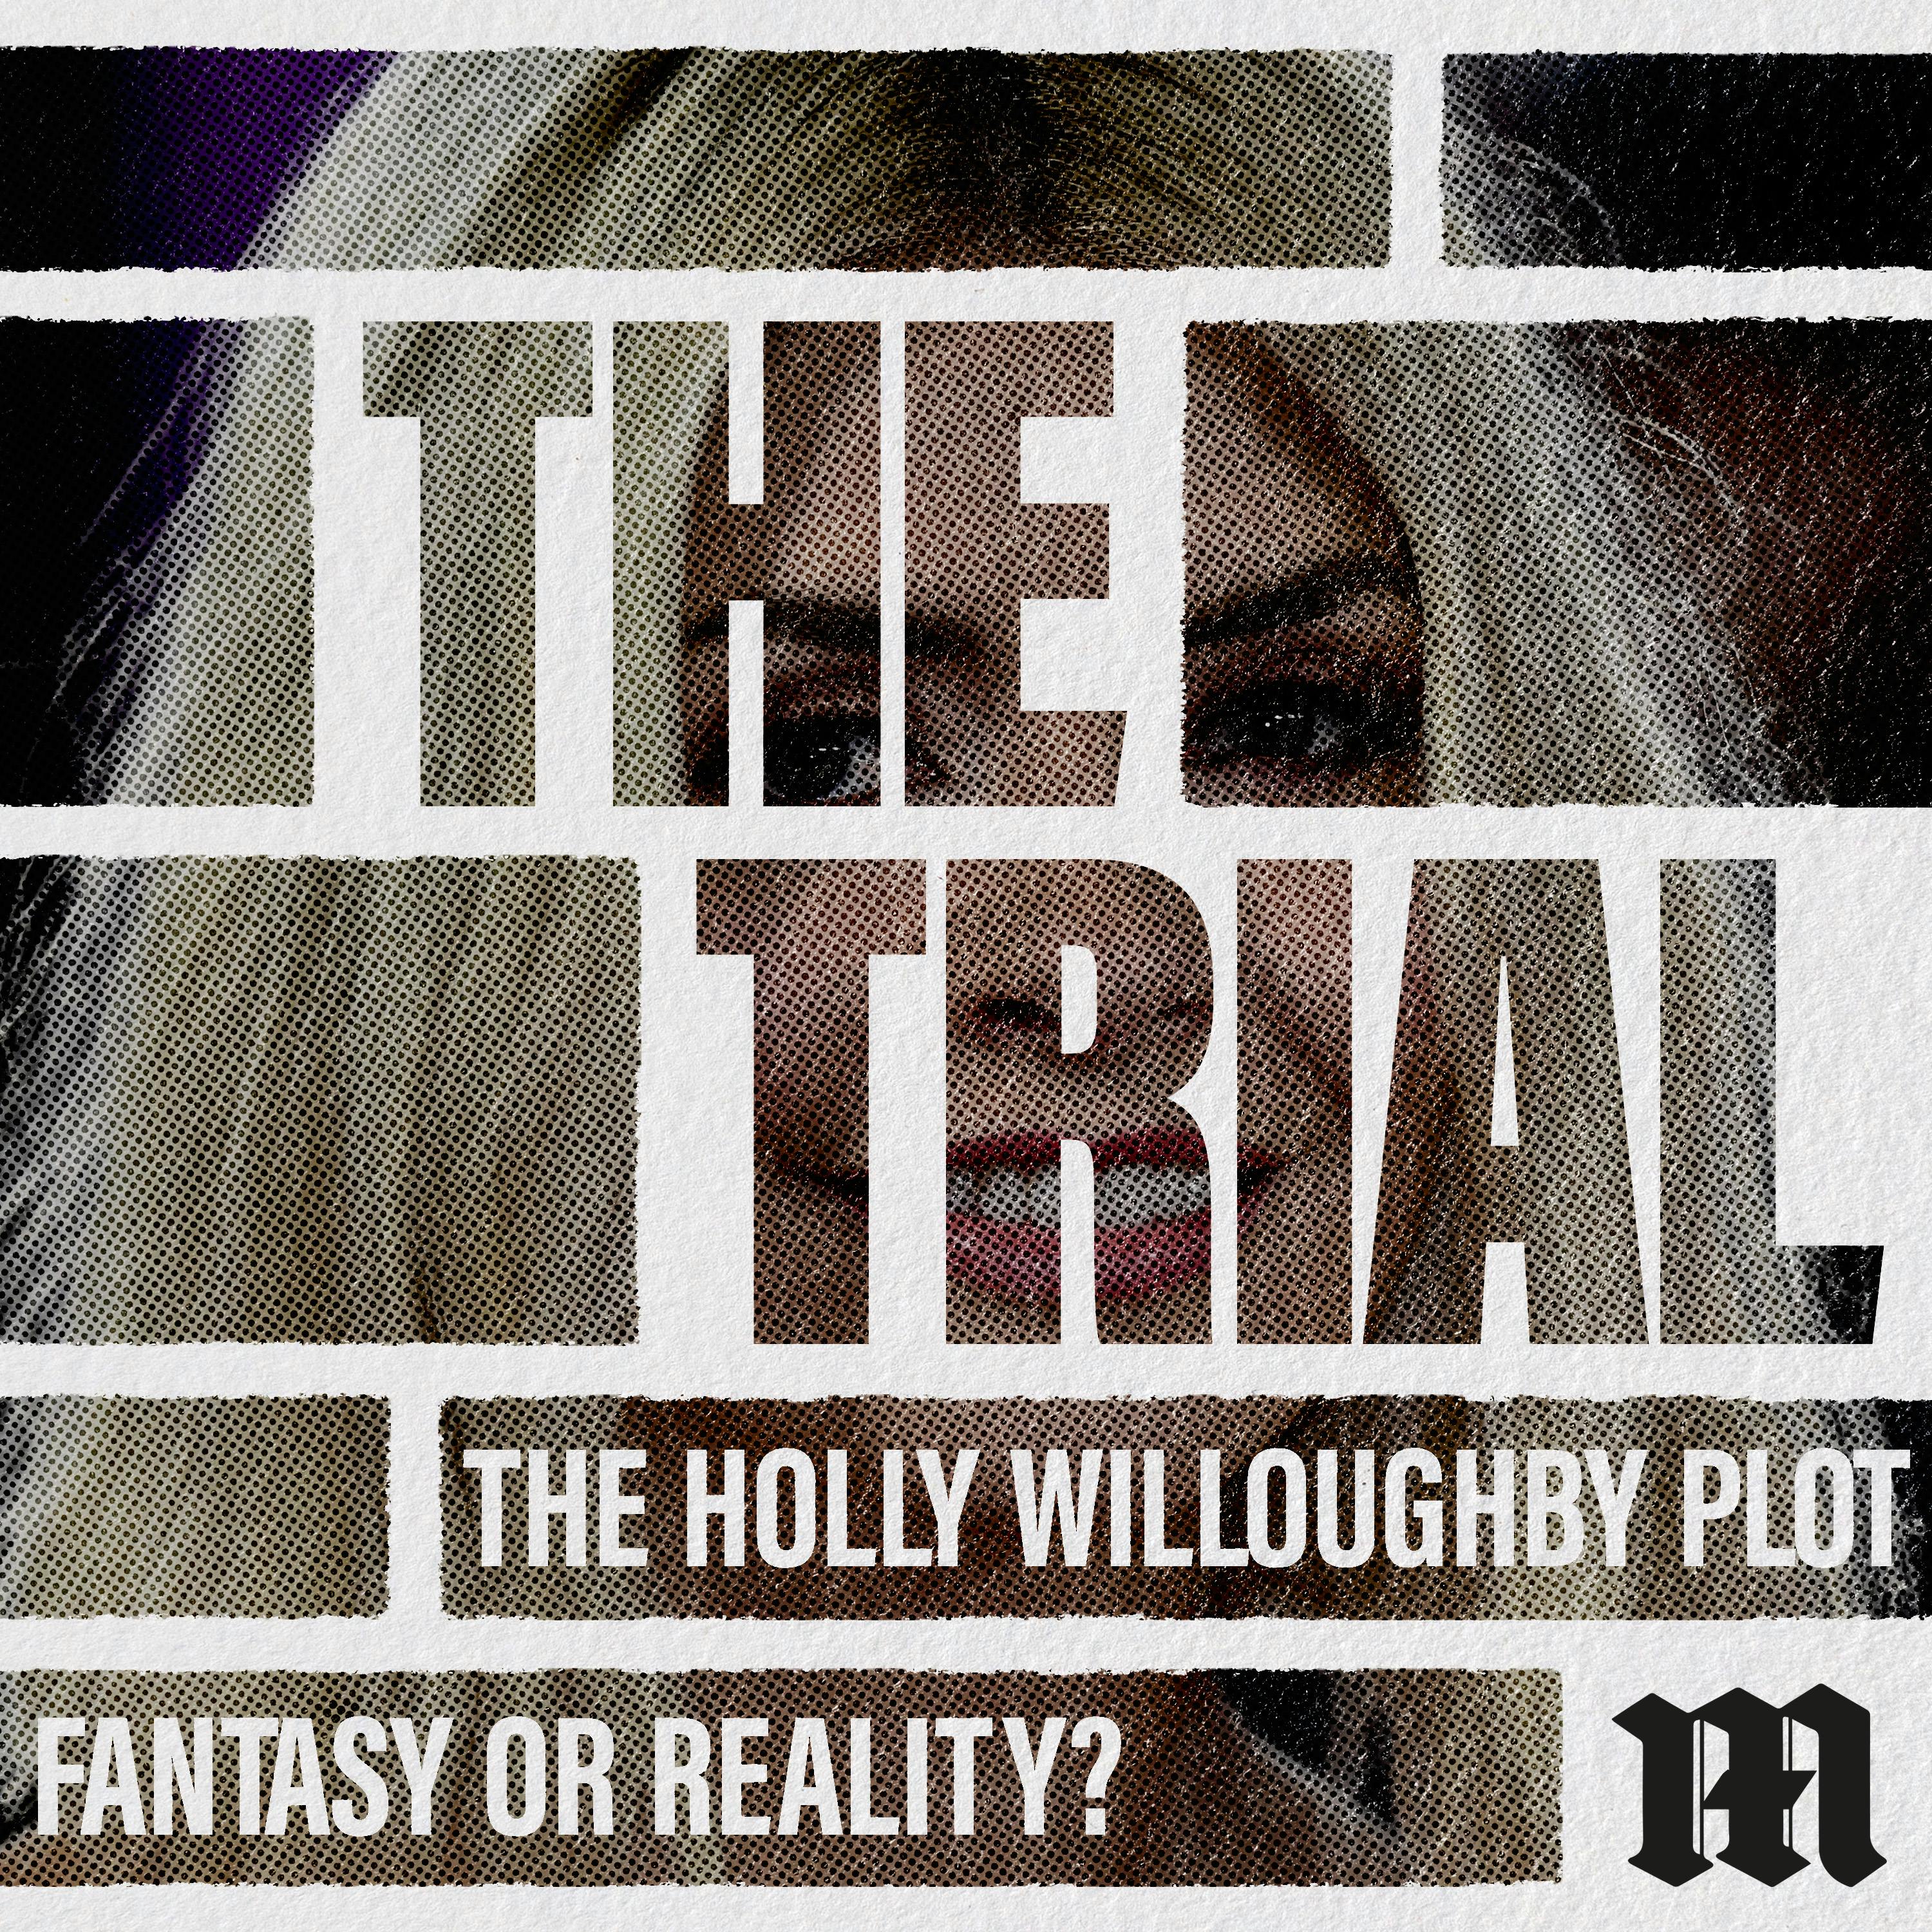 Holly Willoughby: Fantasy or Reality?